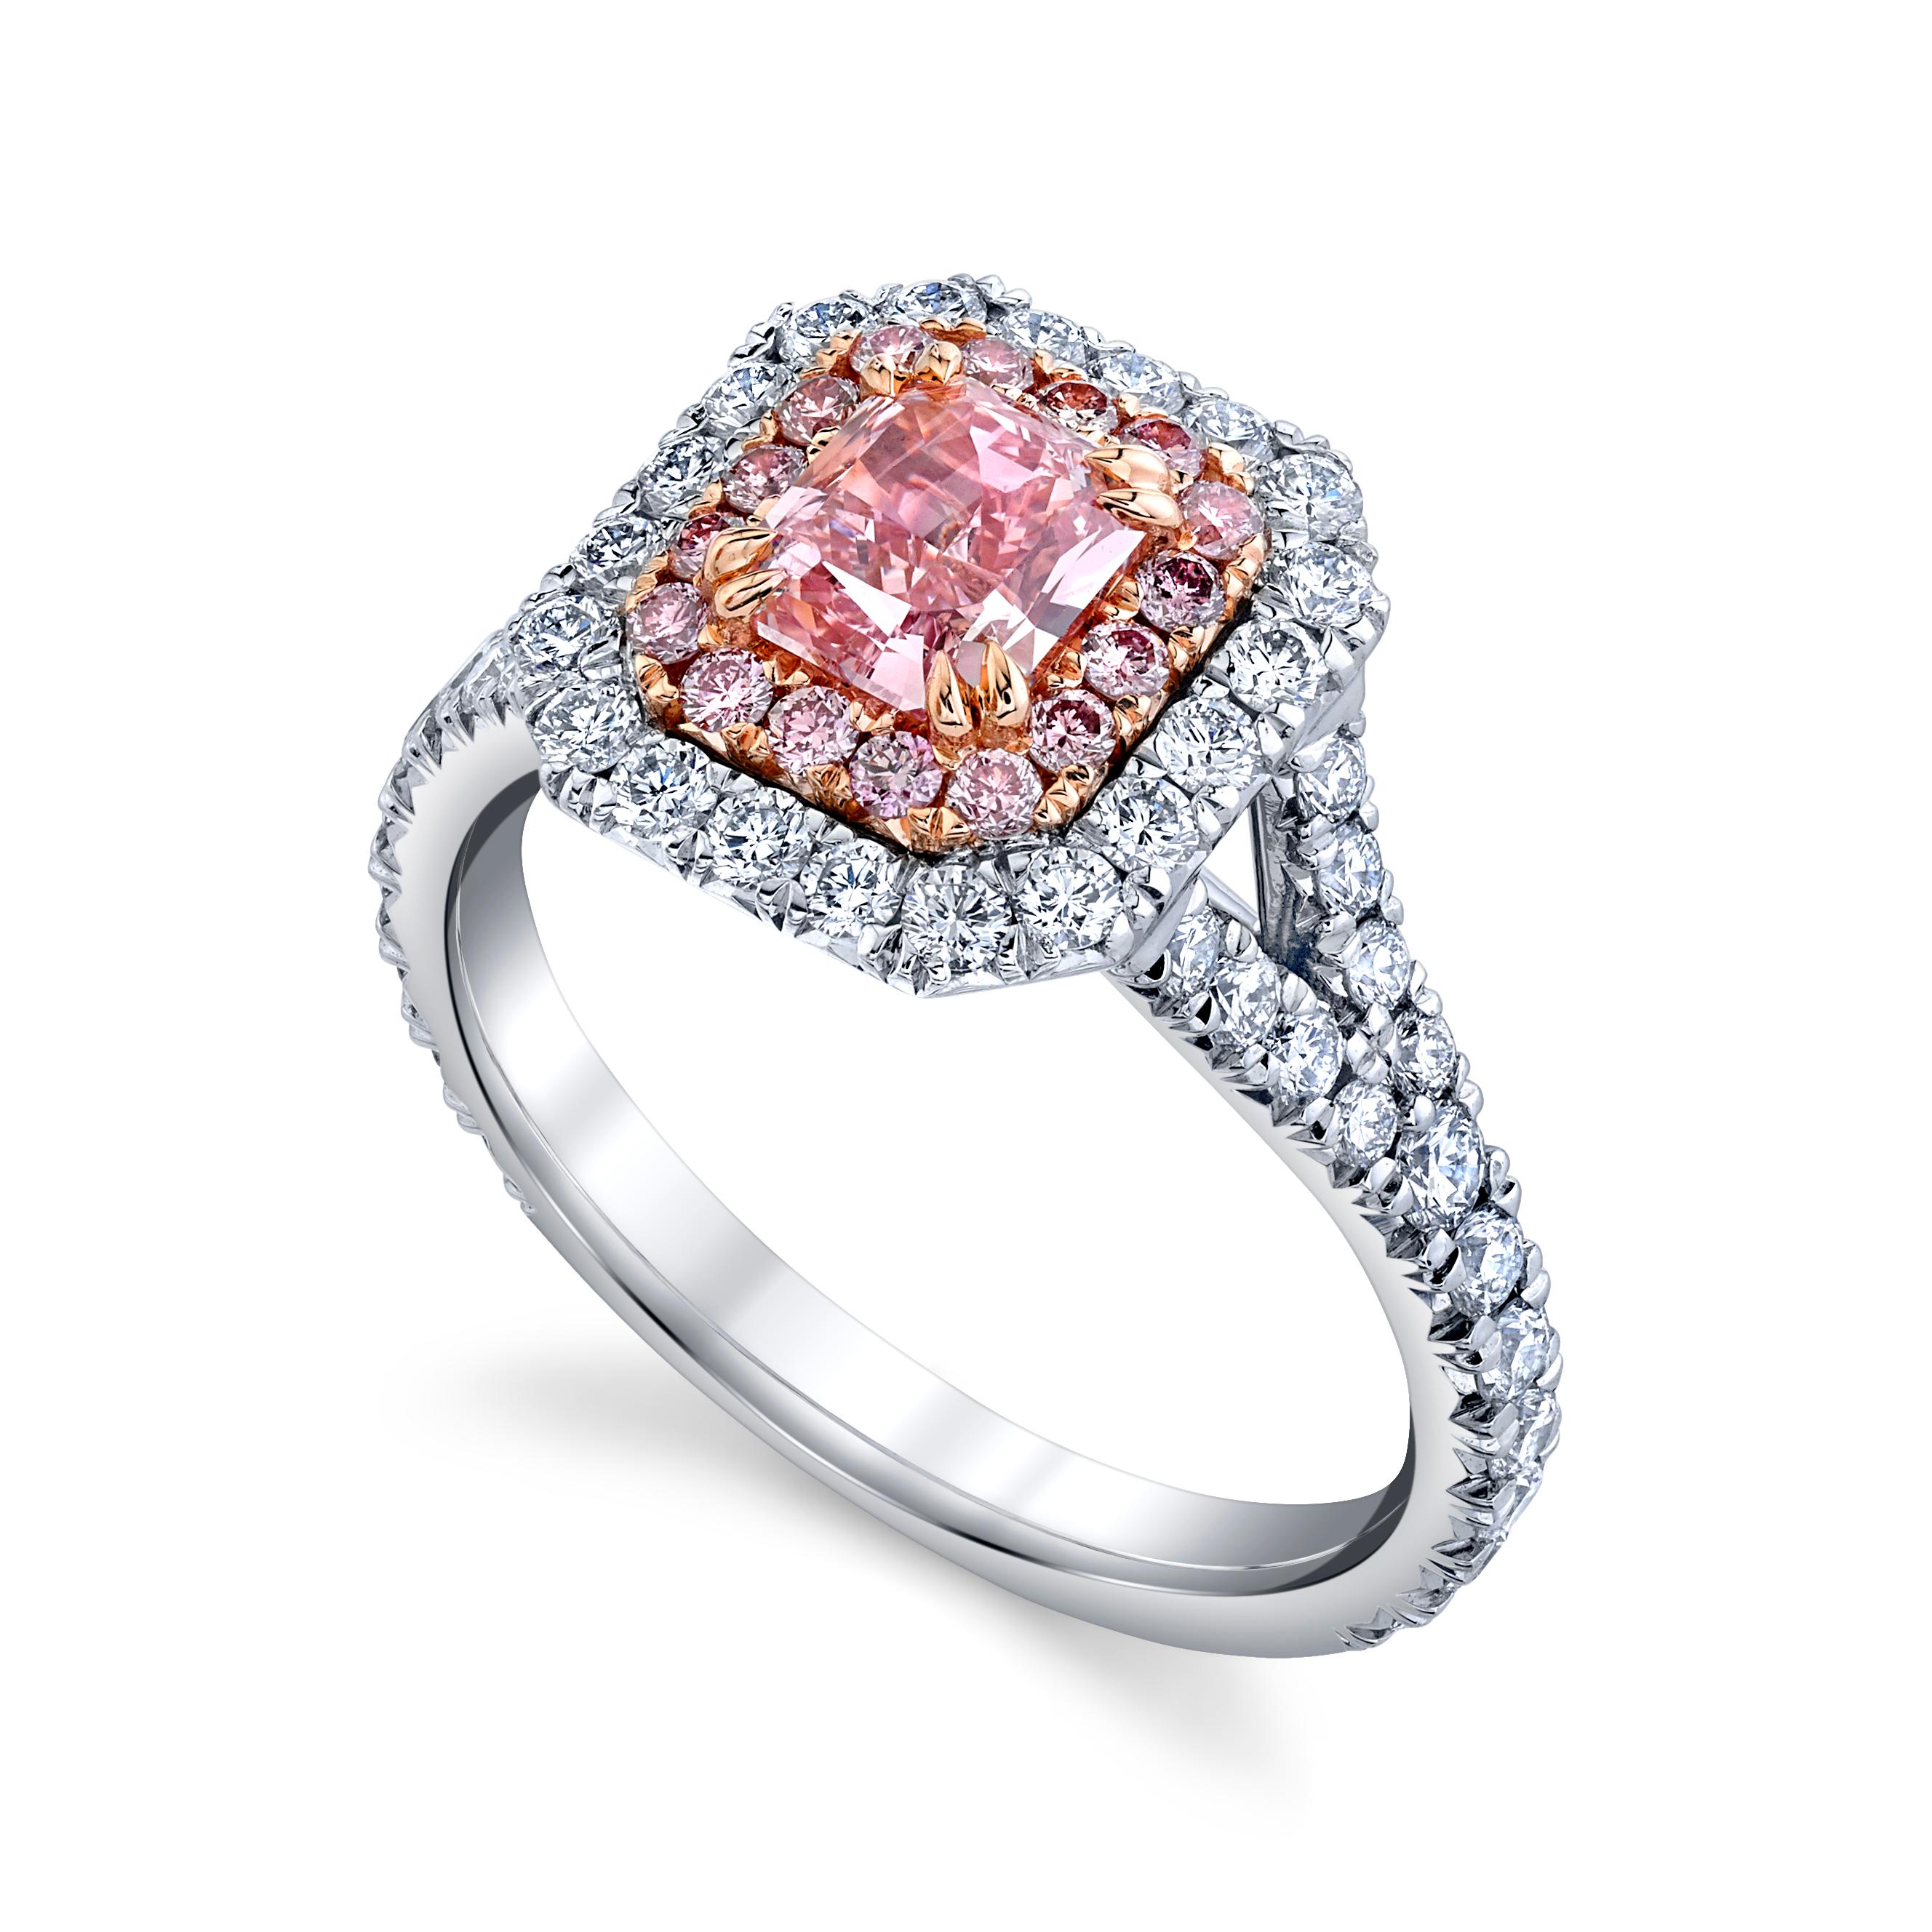 The ultimate family heirloom to in invest in, is Natural Pink Diamonds.

A wonderfully rare 0.84ct Radiant Fancy Intense Pink, Internally Flawless Natural Diamond set in Platinum & 18K Rose Gold surround by stunning Pink and Colorless Natural